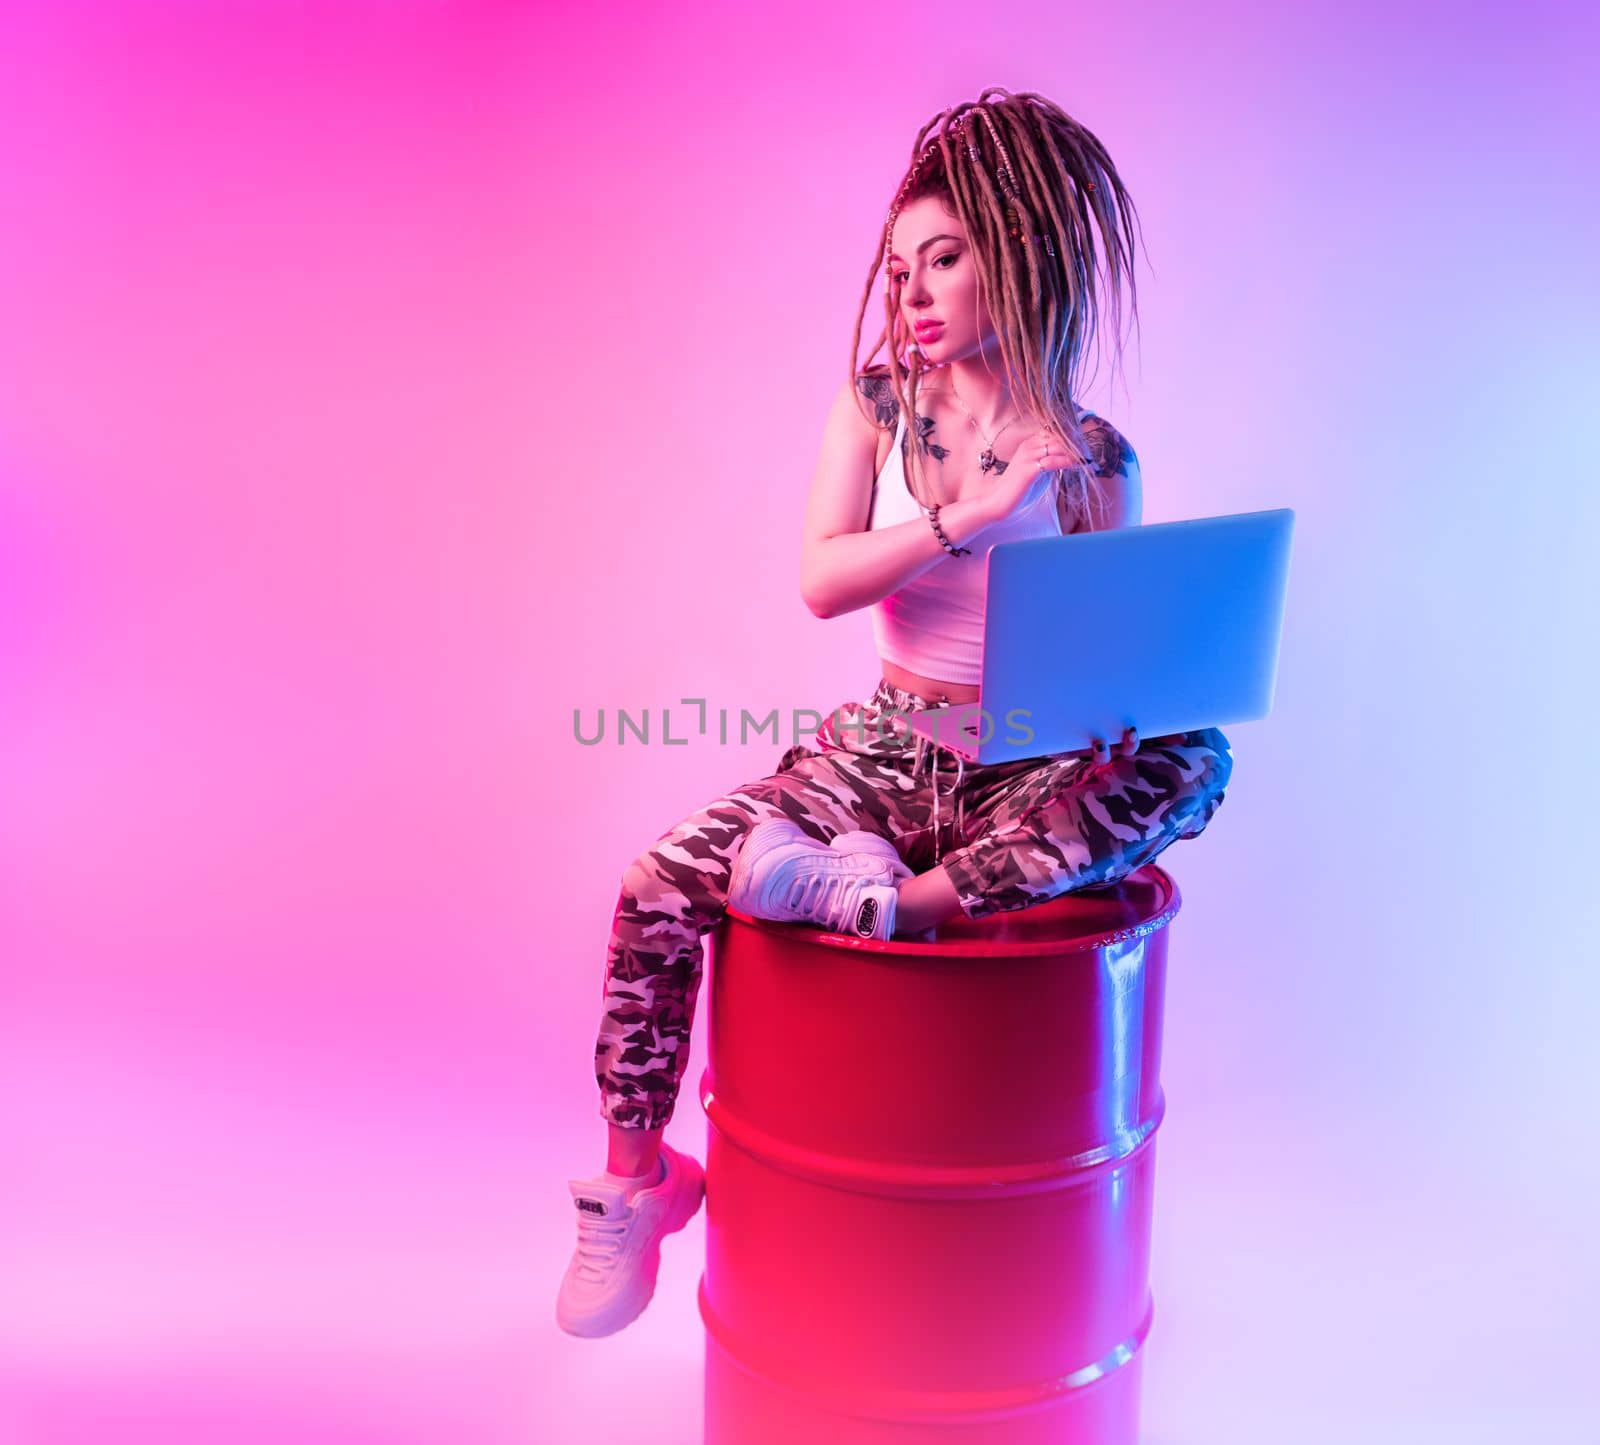 sexy girl with braids dreadlocks on her head in neon light with a laptop on a light background copy paste by Rotozey